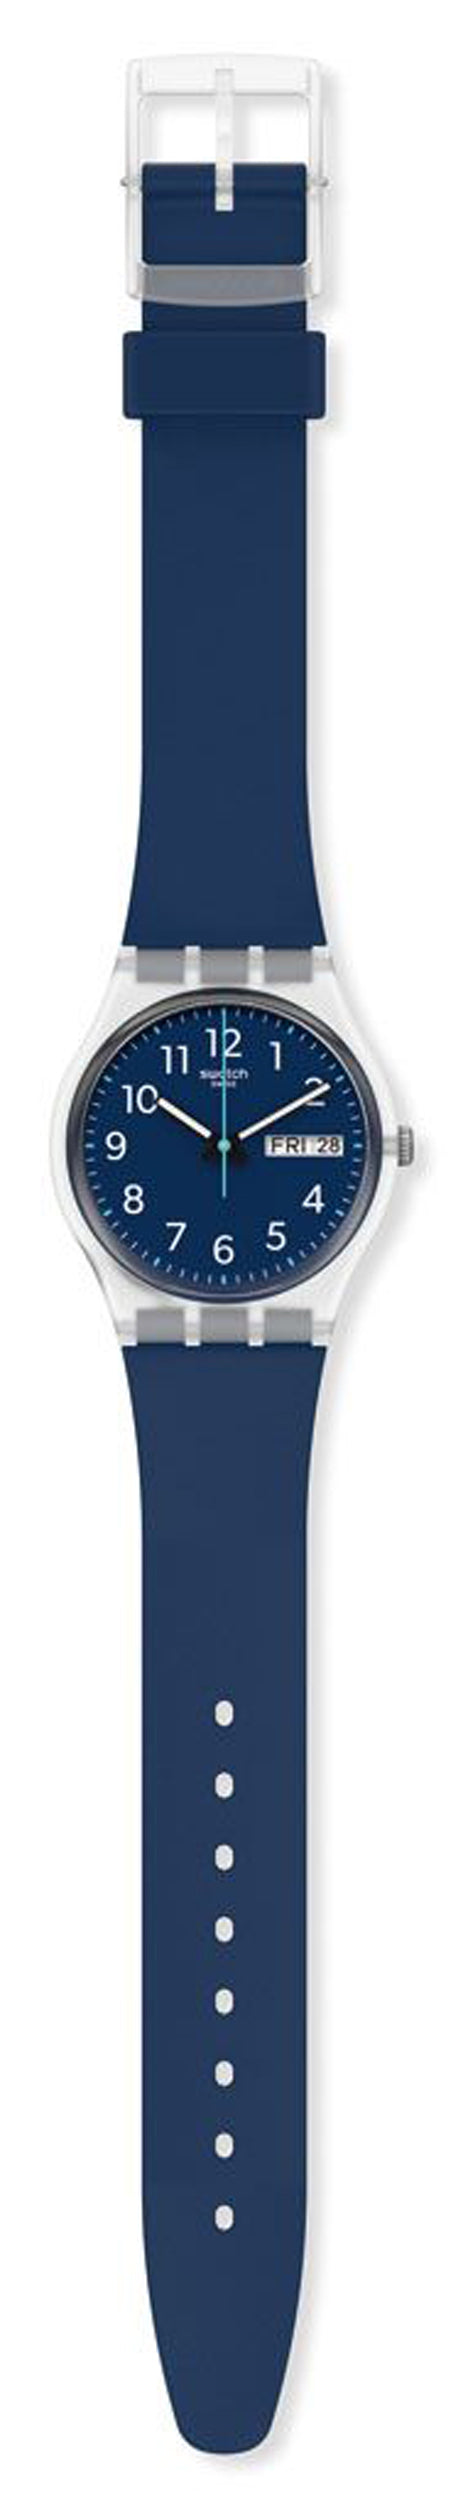 Swatch RINSE REPEAT NAVY GE725